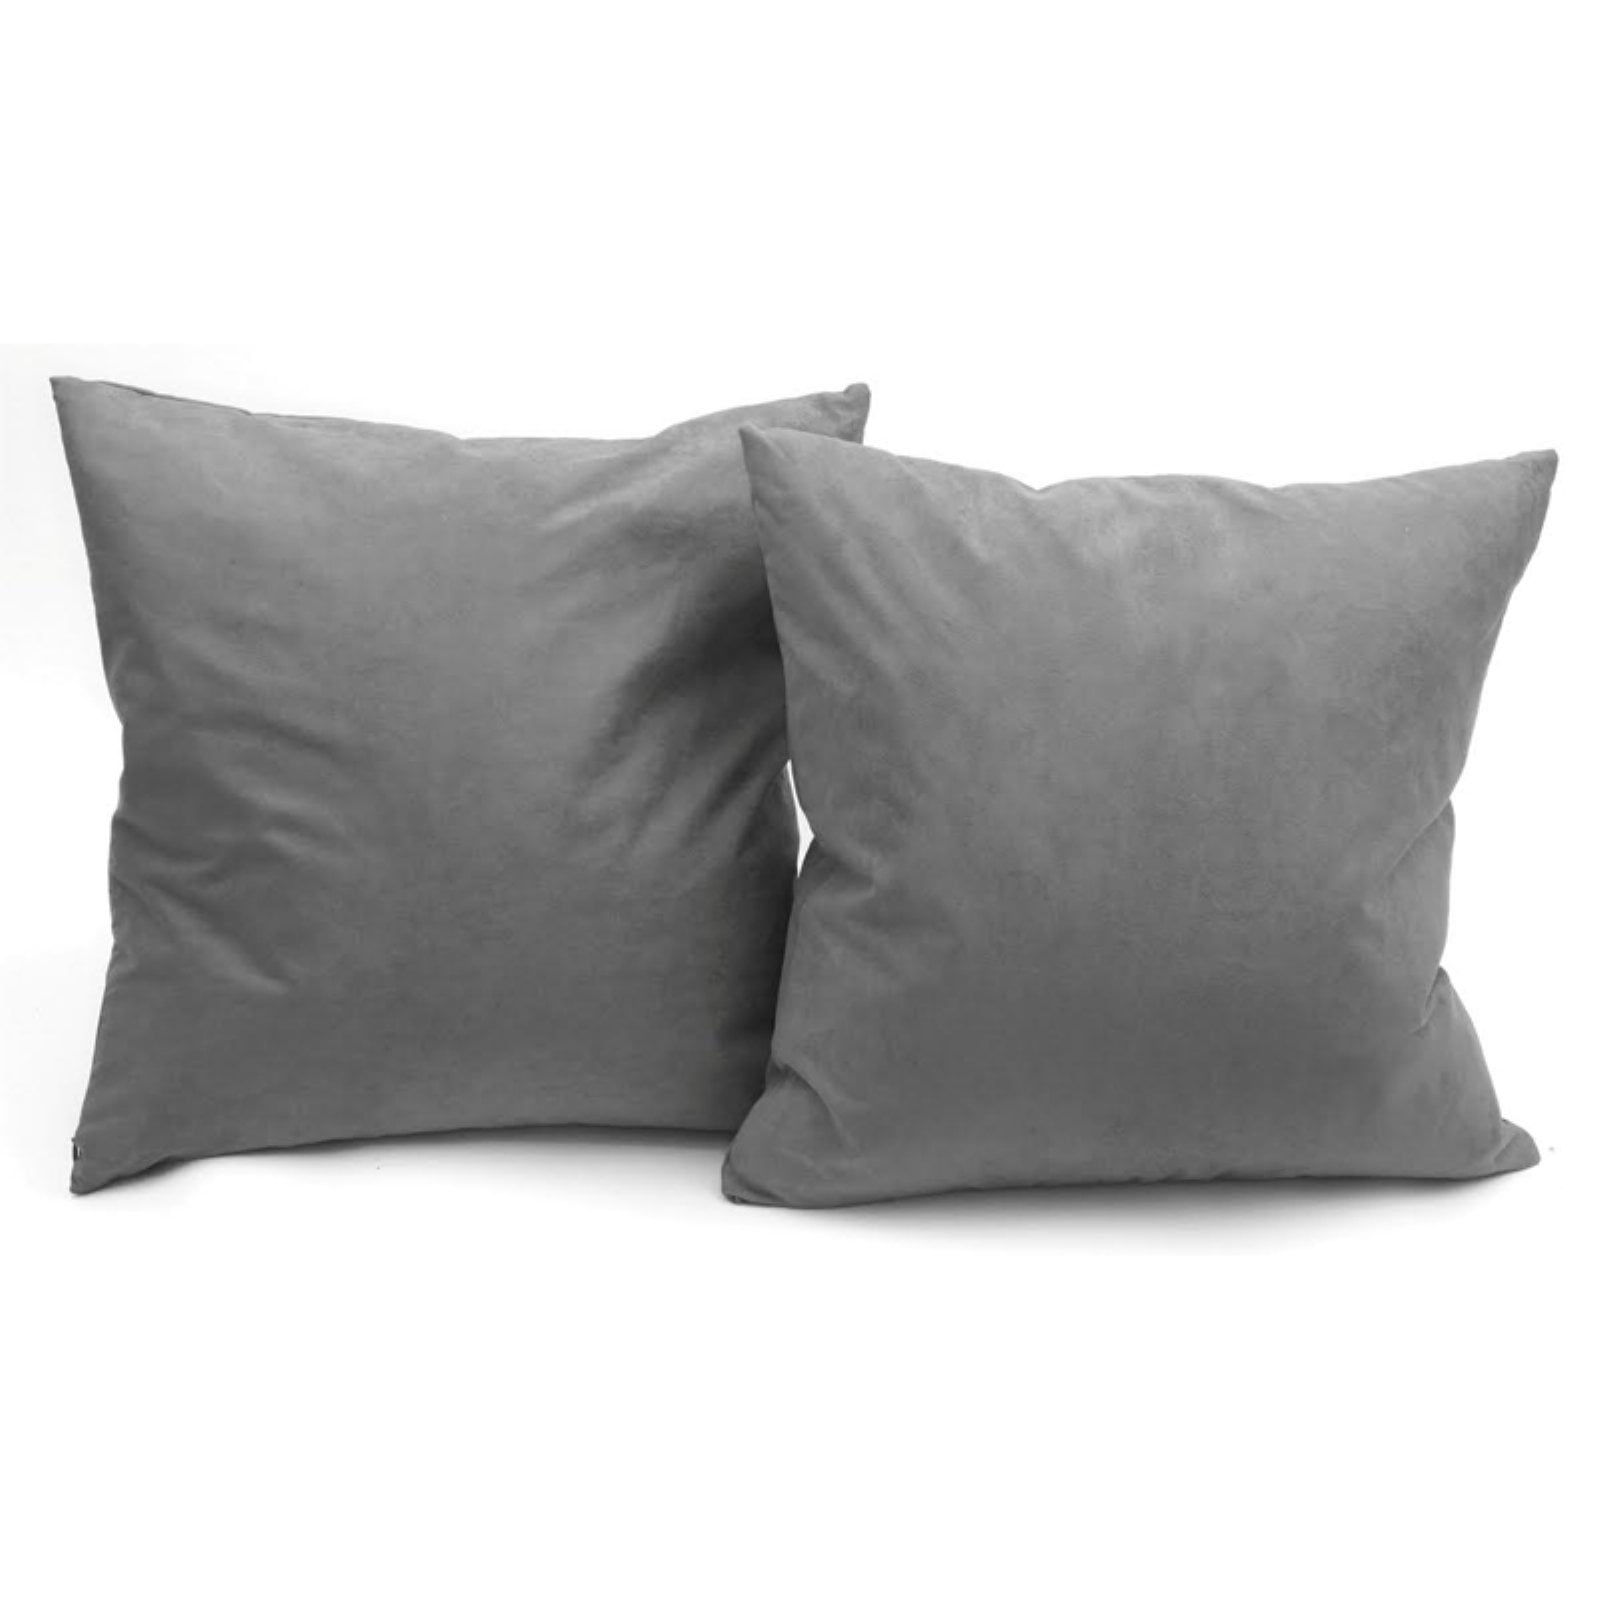 55CM FILLED LUXURY LARGE SOFT VELVET CHARCOAL GREY SILVER PIPED CUSHION 22" 